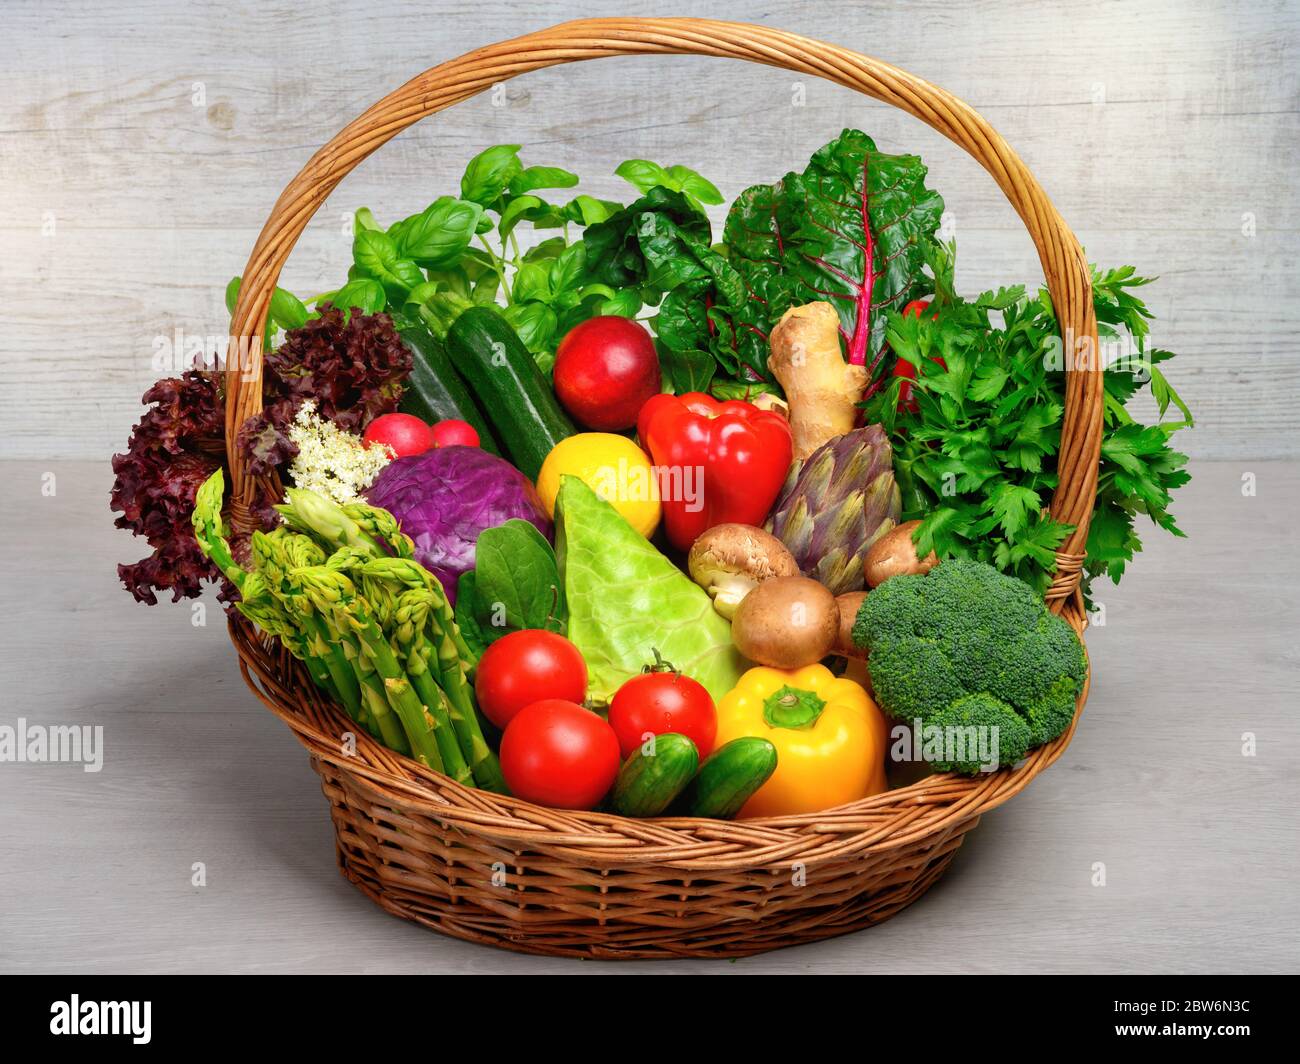 Vintage basket filled with an arrangement of mixed colorful vegetables on light background, looking fresh, healthy and appetizing, a whole food nutrit Stock Photo